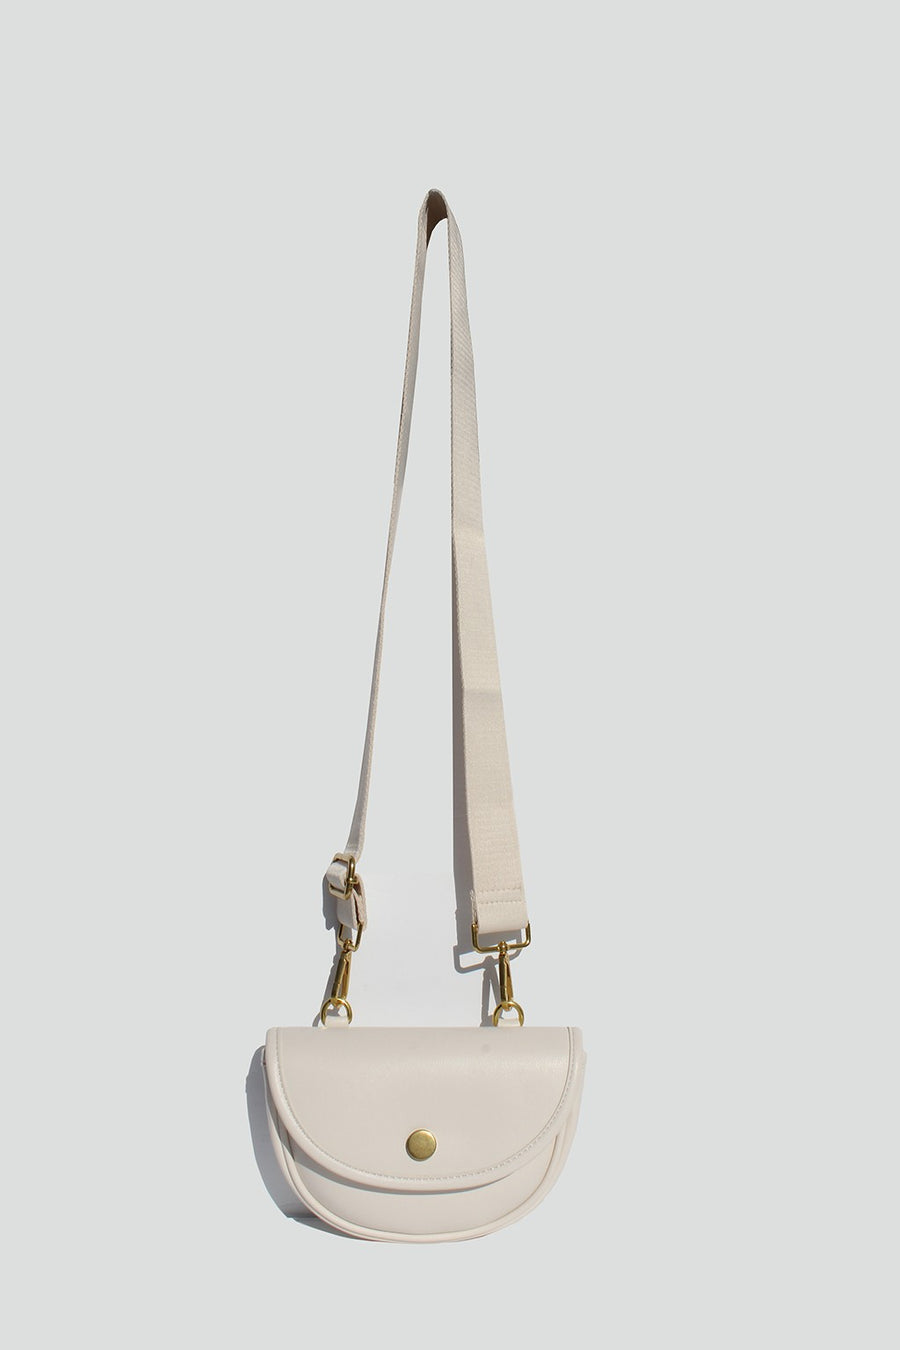 Featuring a small multi compartment crossbody bag with an adjustable strap in the color ivory 